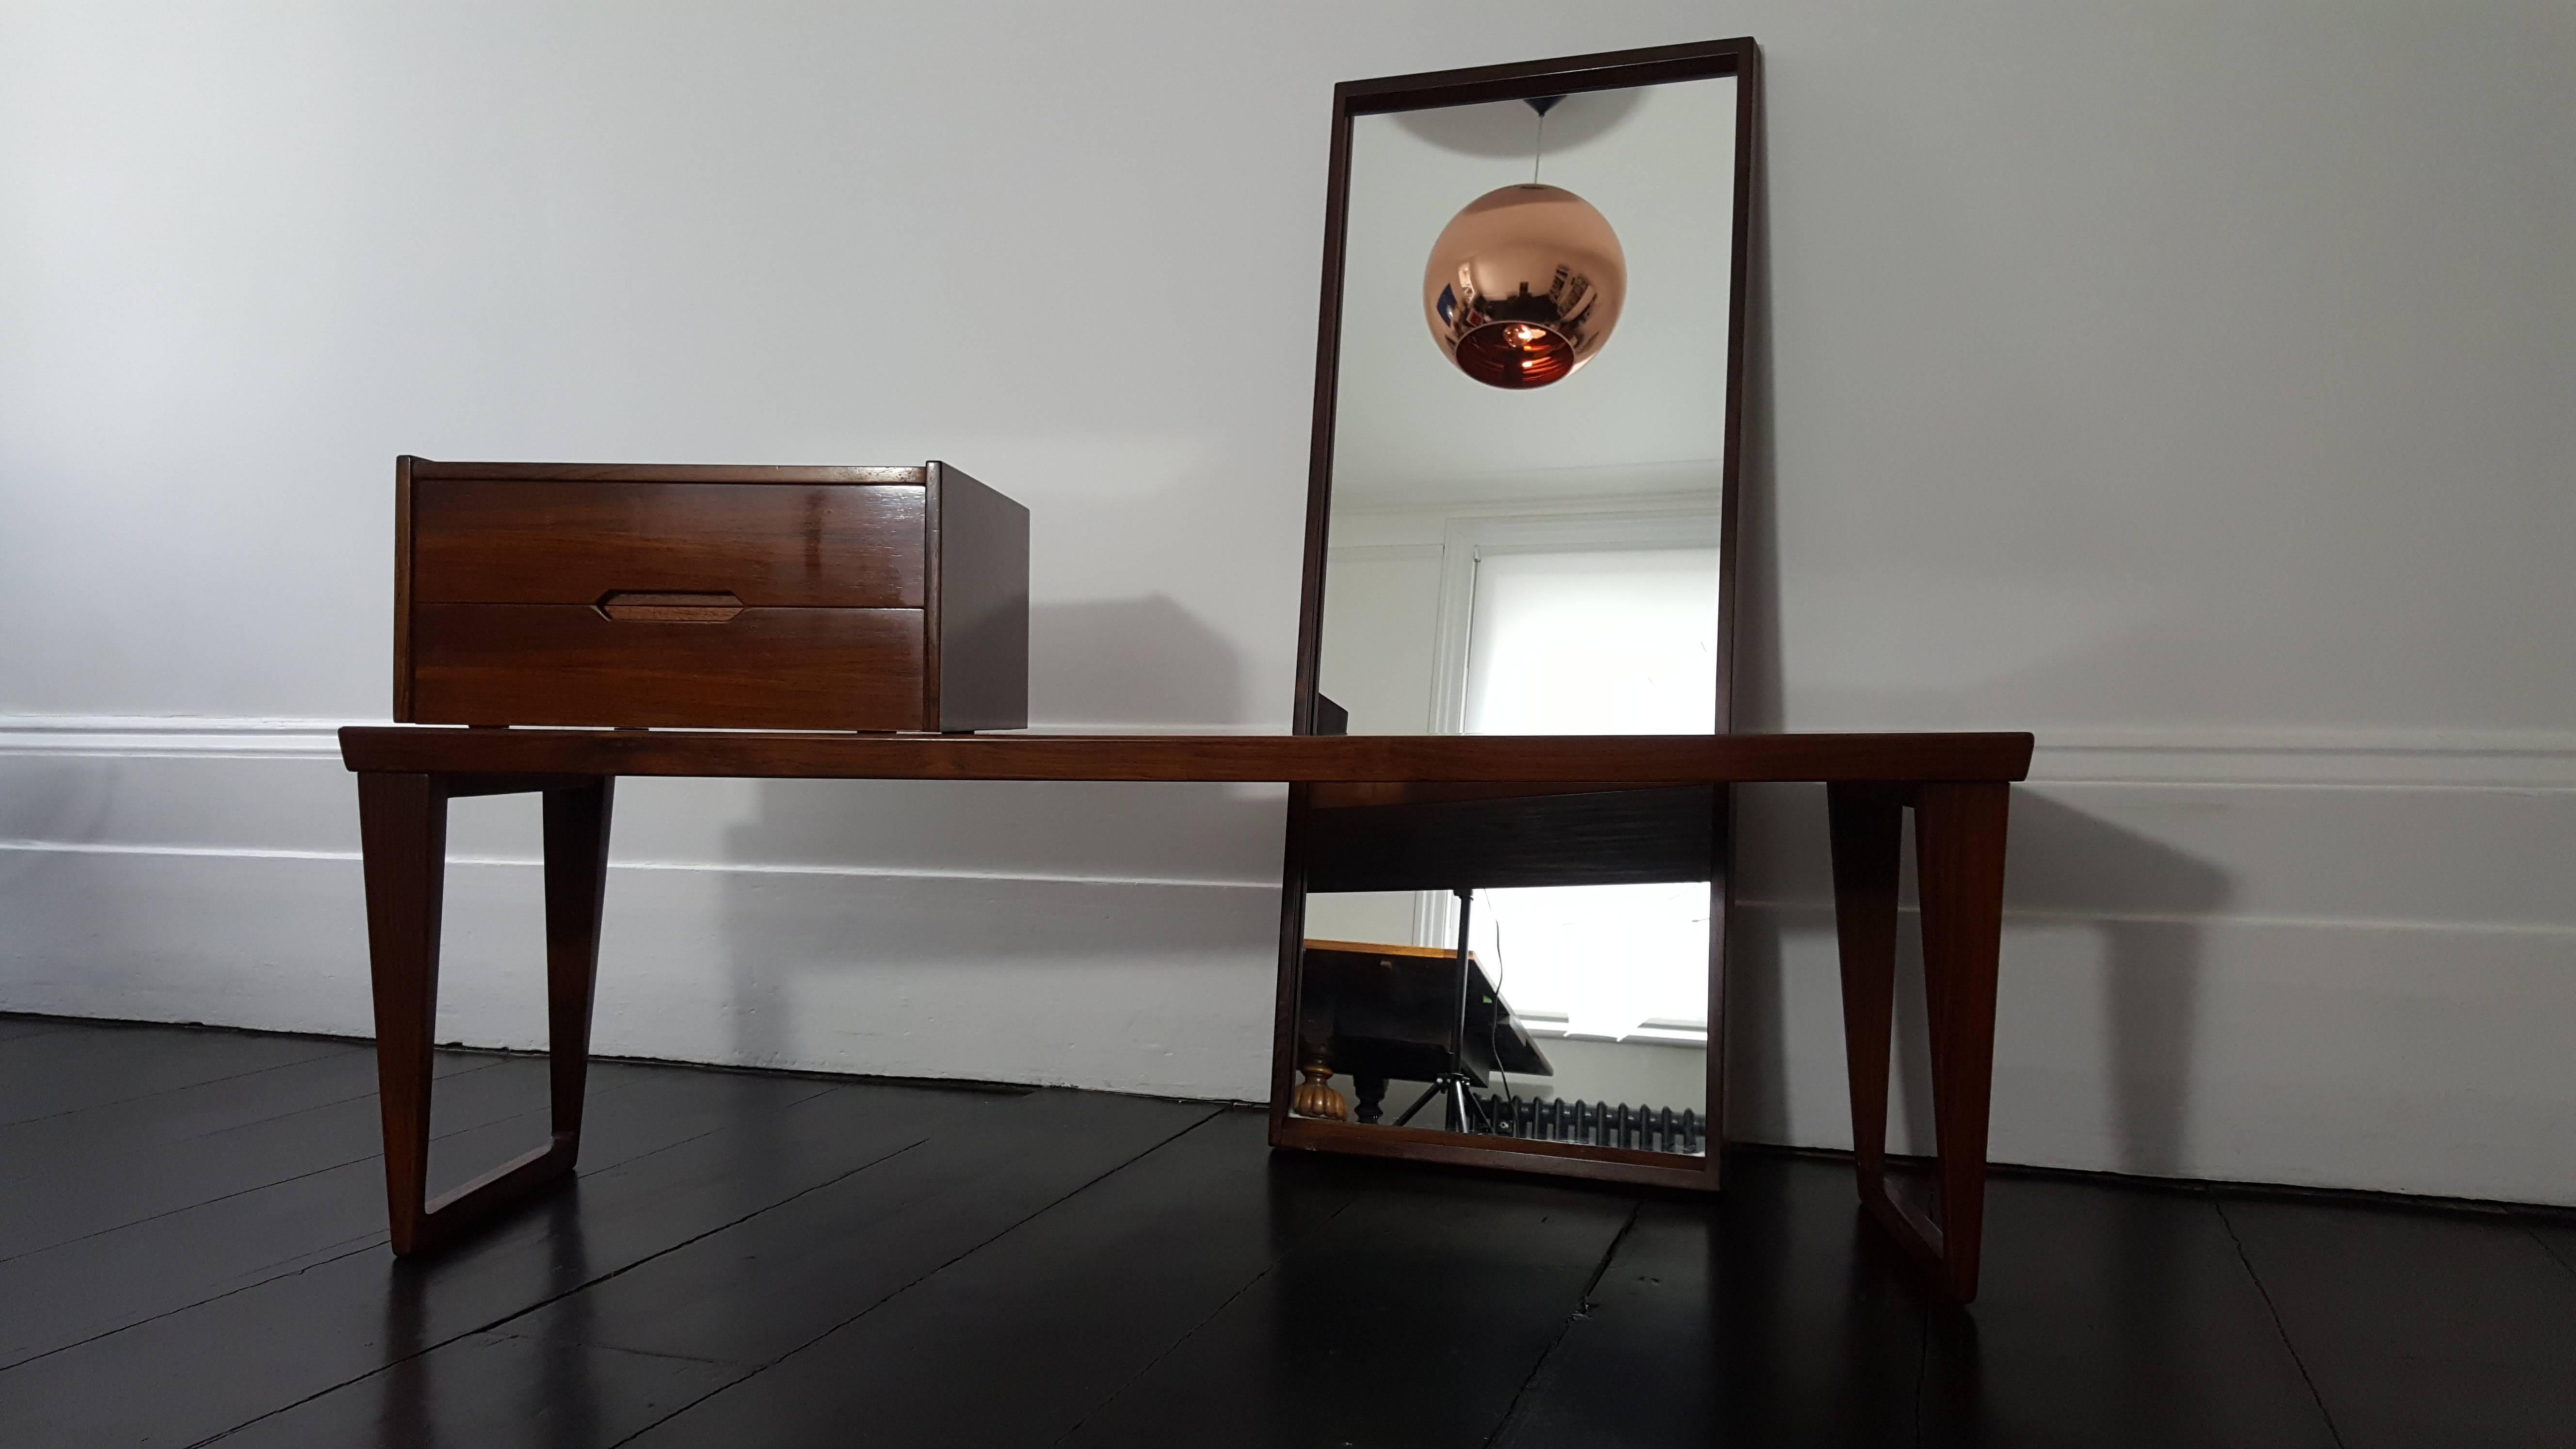 Kai Kristiansen - Aksel Kjersgaard rosewood entrance set.

Incredible rosewood entrance set consisting of bench, chest and mirror. 

We ship globally - please contact to discuss.

Measurements:
Mirror: H 104, W 40 cms.
Chest: H 20, W 40, D